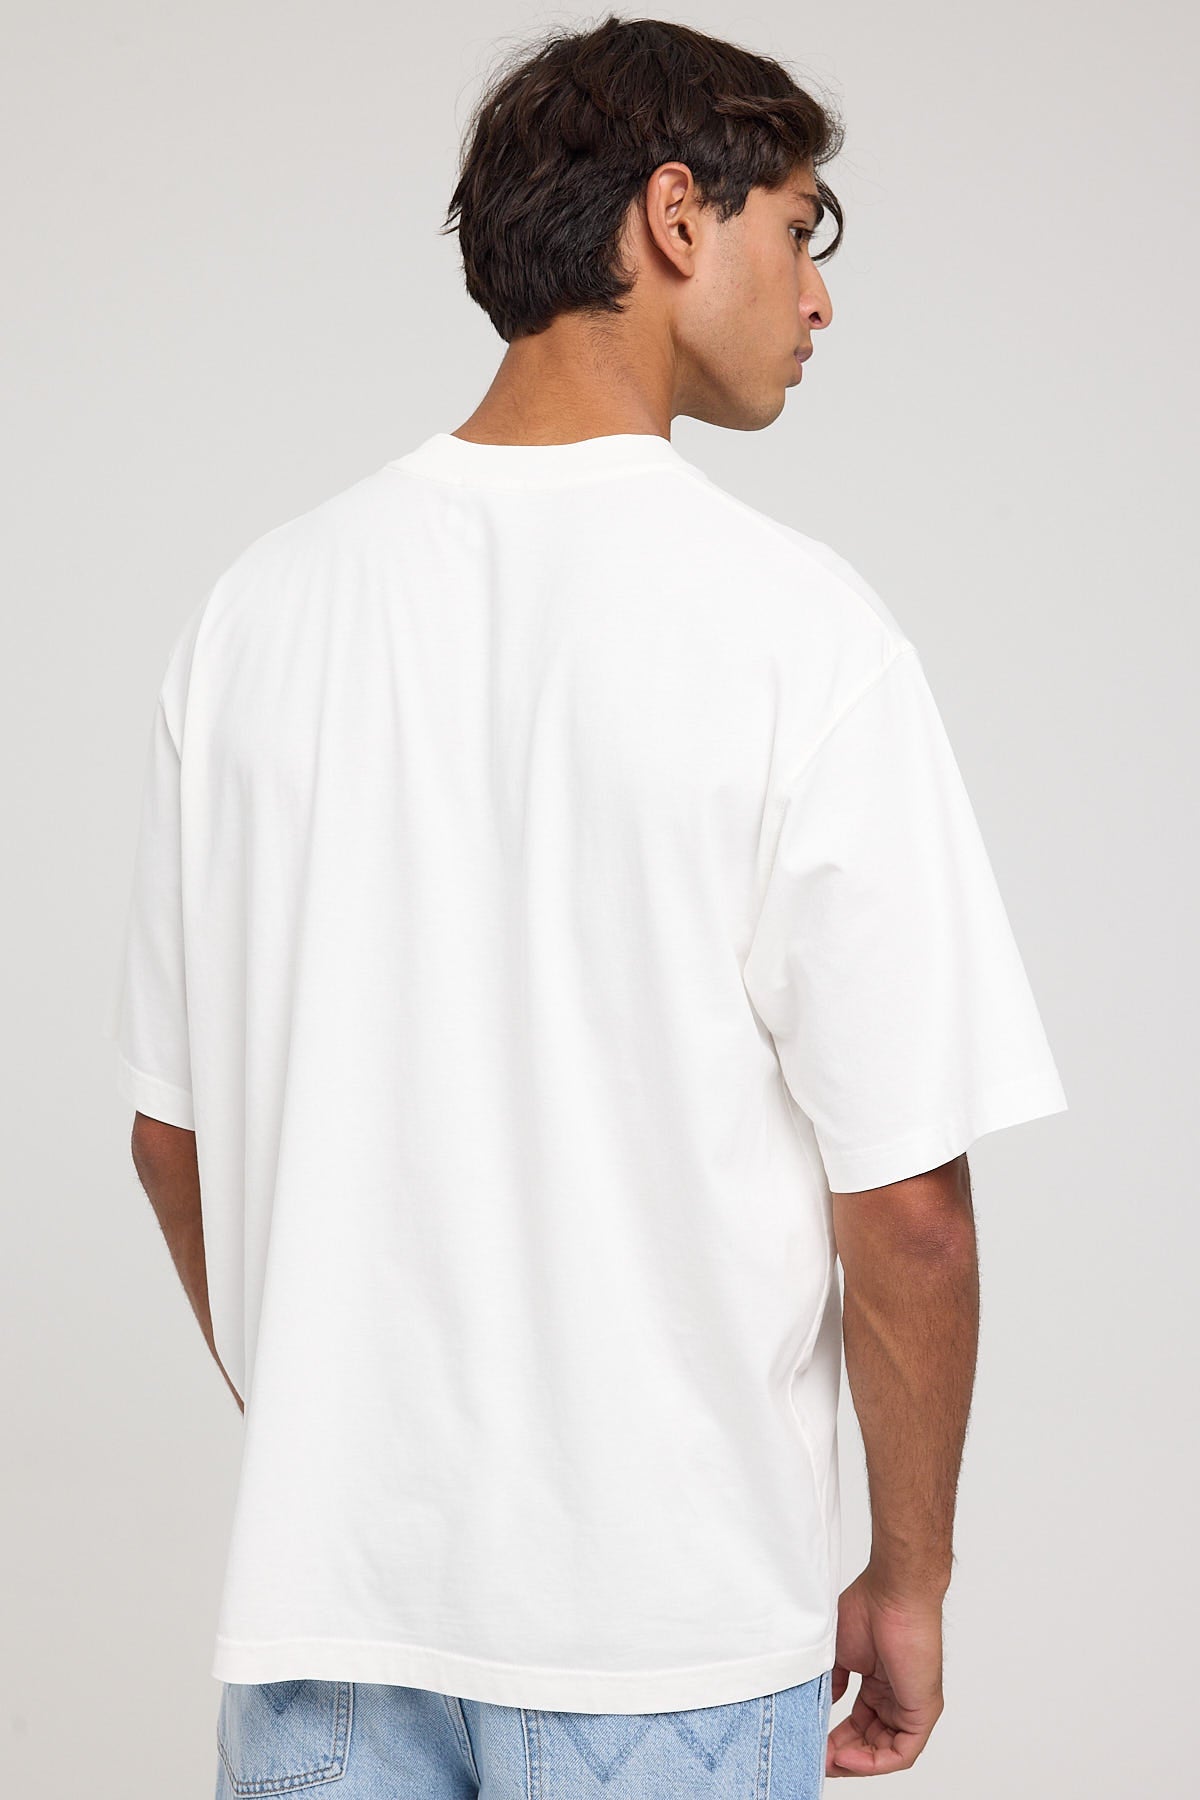 Lacoste Neo Heritage Loose Fit Logo T-Shirt Eco SMAR